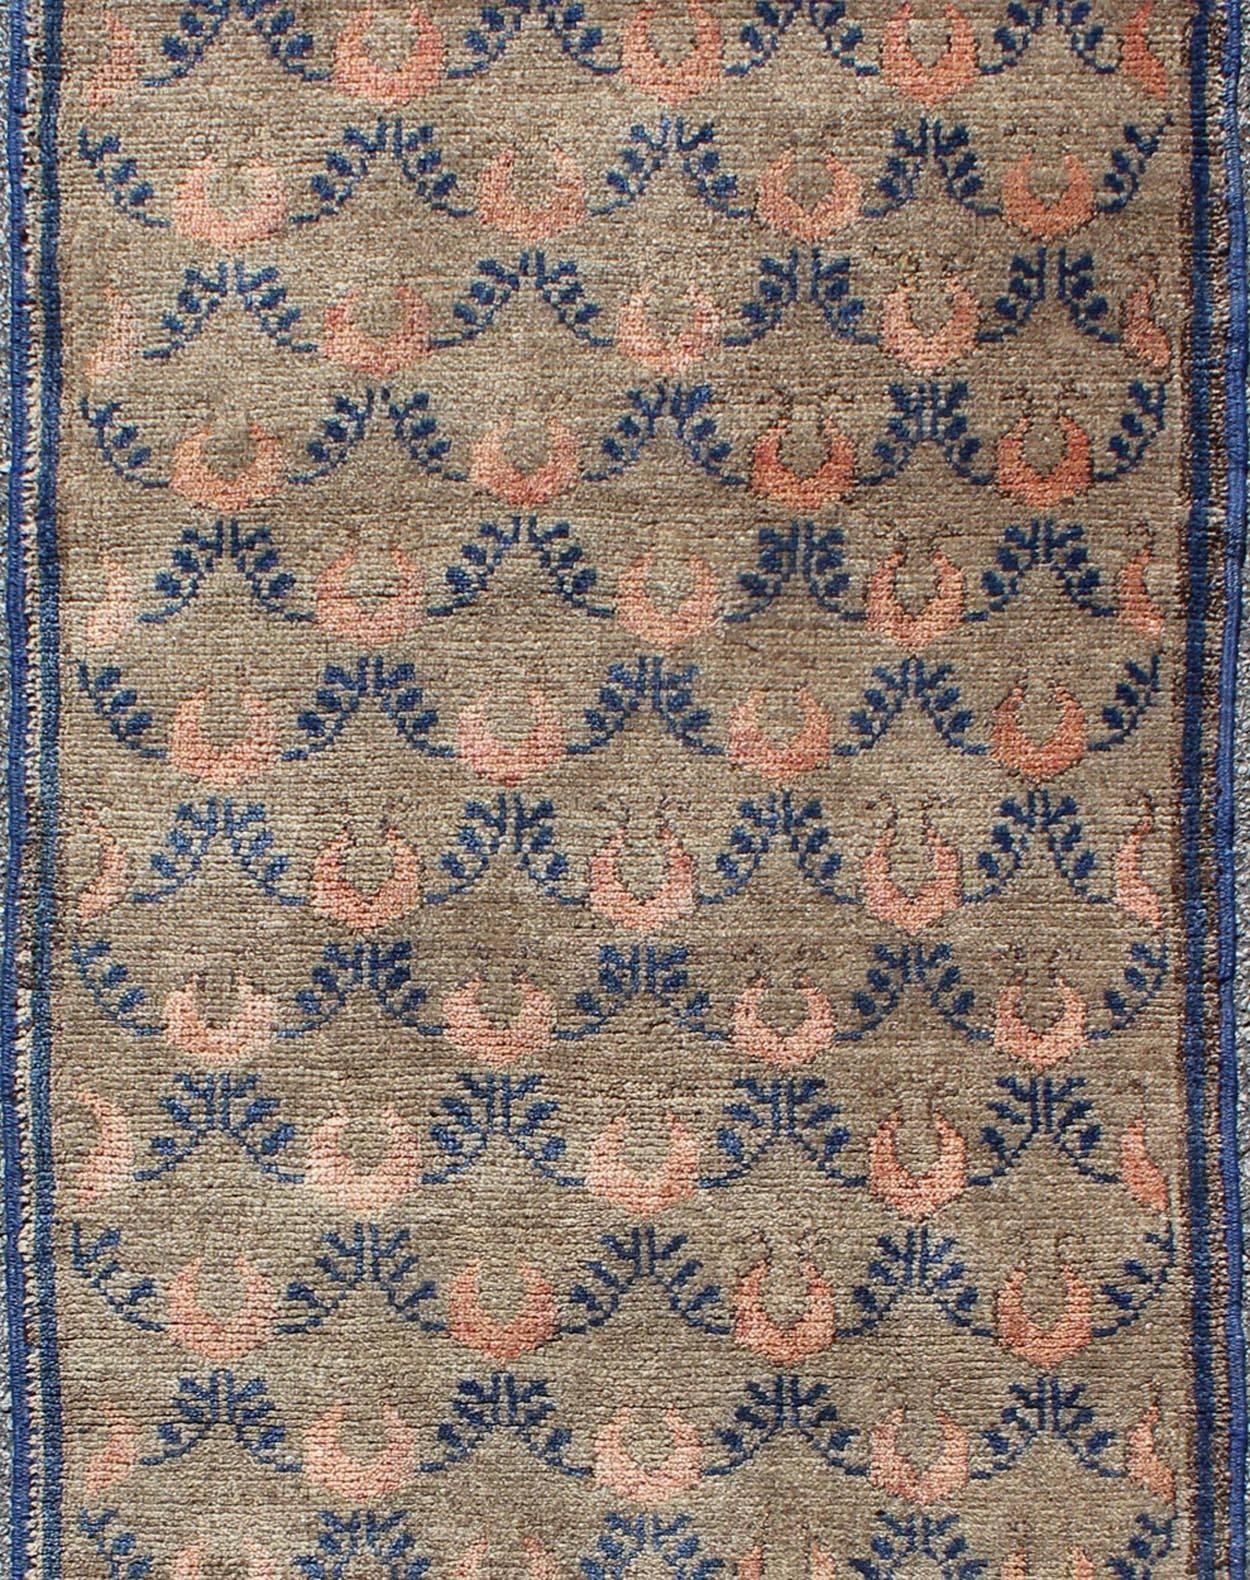 All-Over Vintage Turkish Tulu Rug with Vining Latticework in Tan, Cream and Blue In Excellent Condition For Sale In Atlanta, GA